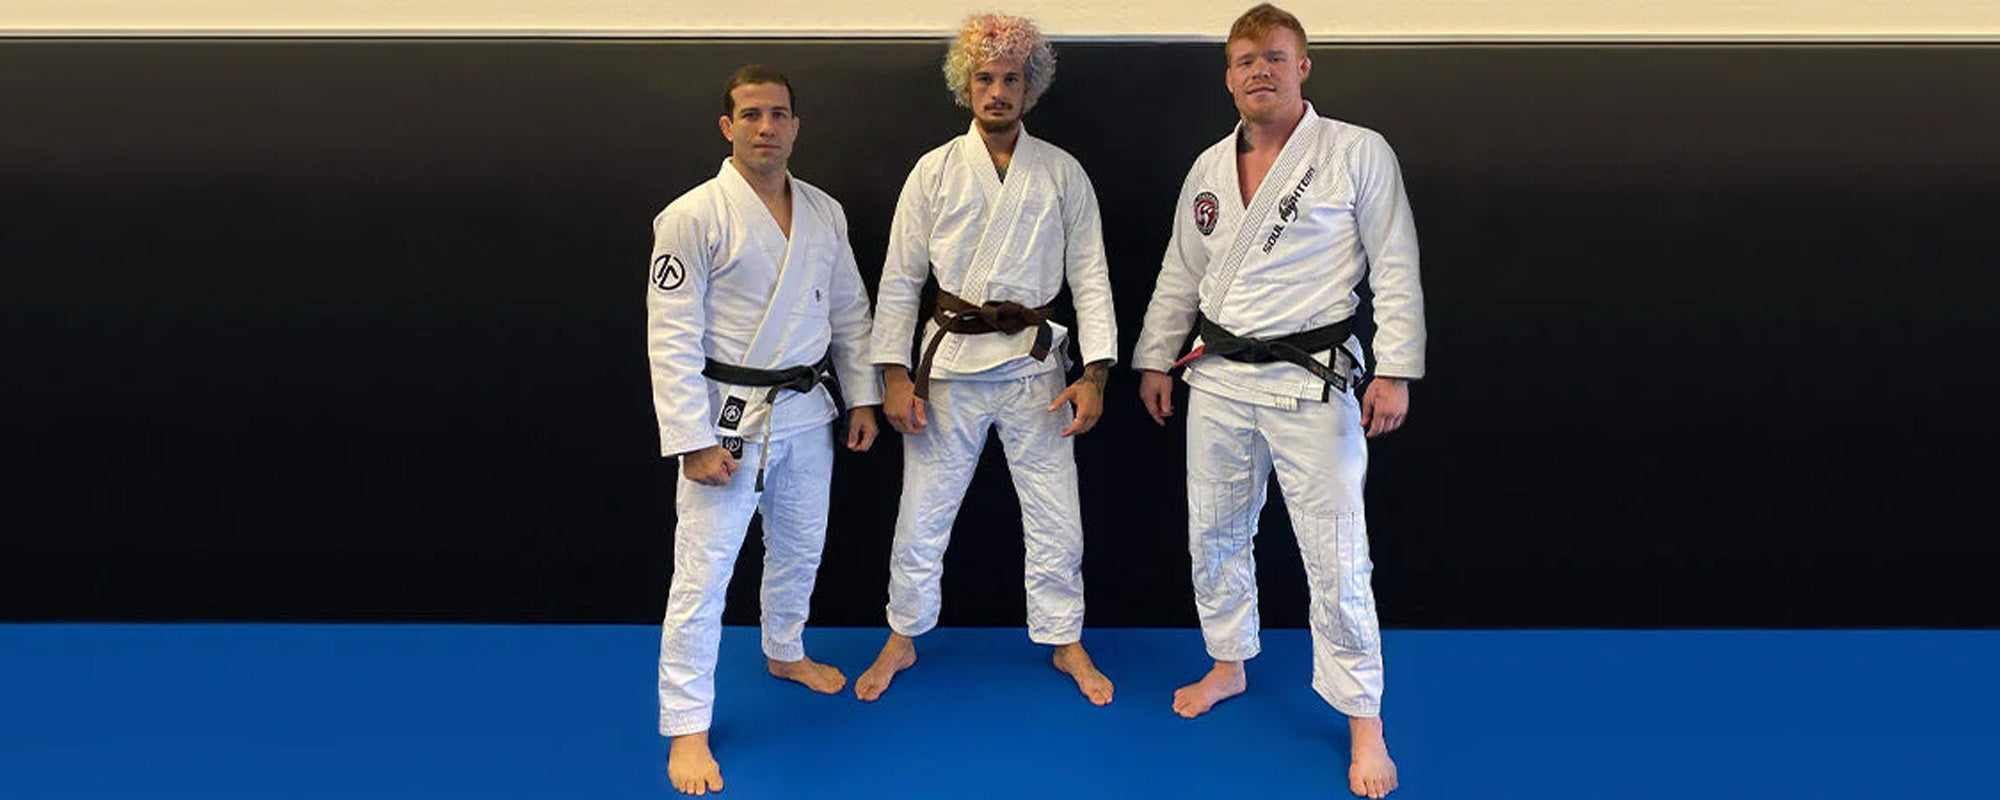 Sean O’Malley “Sugar” Spoke About His Participation in BJJ Tournament in a Recent Interview